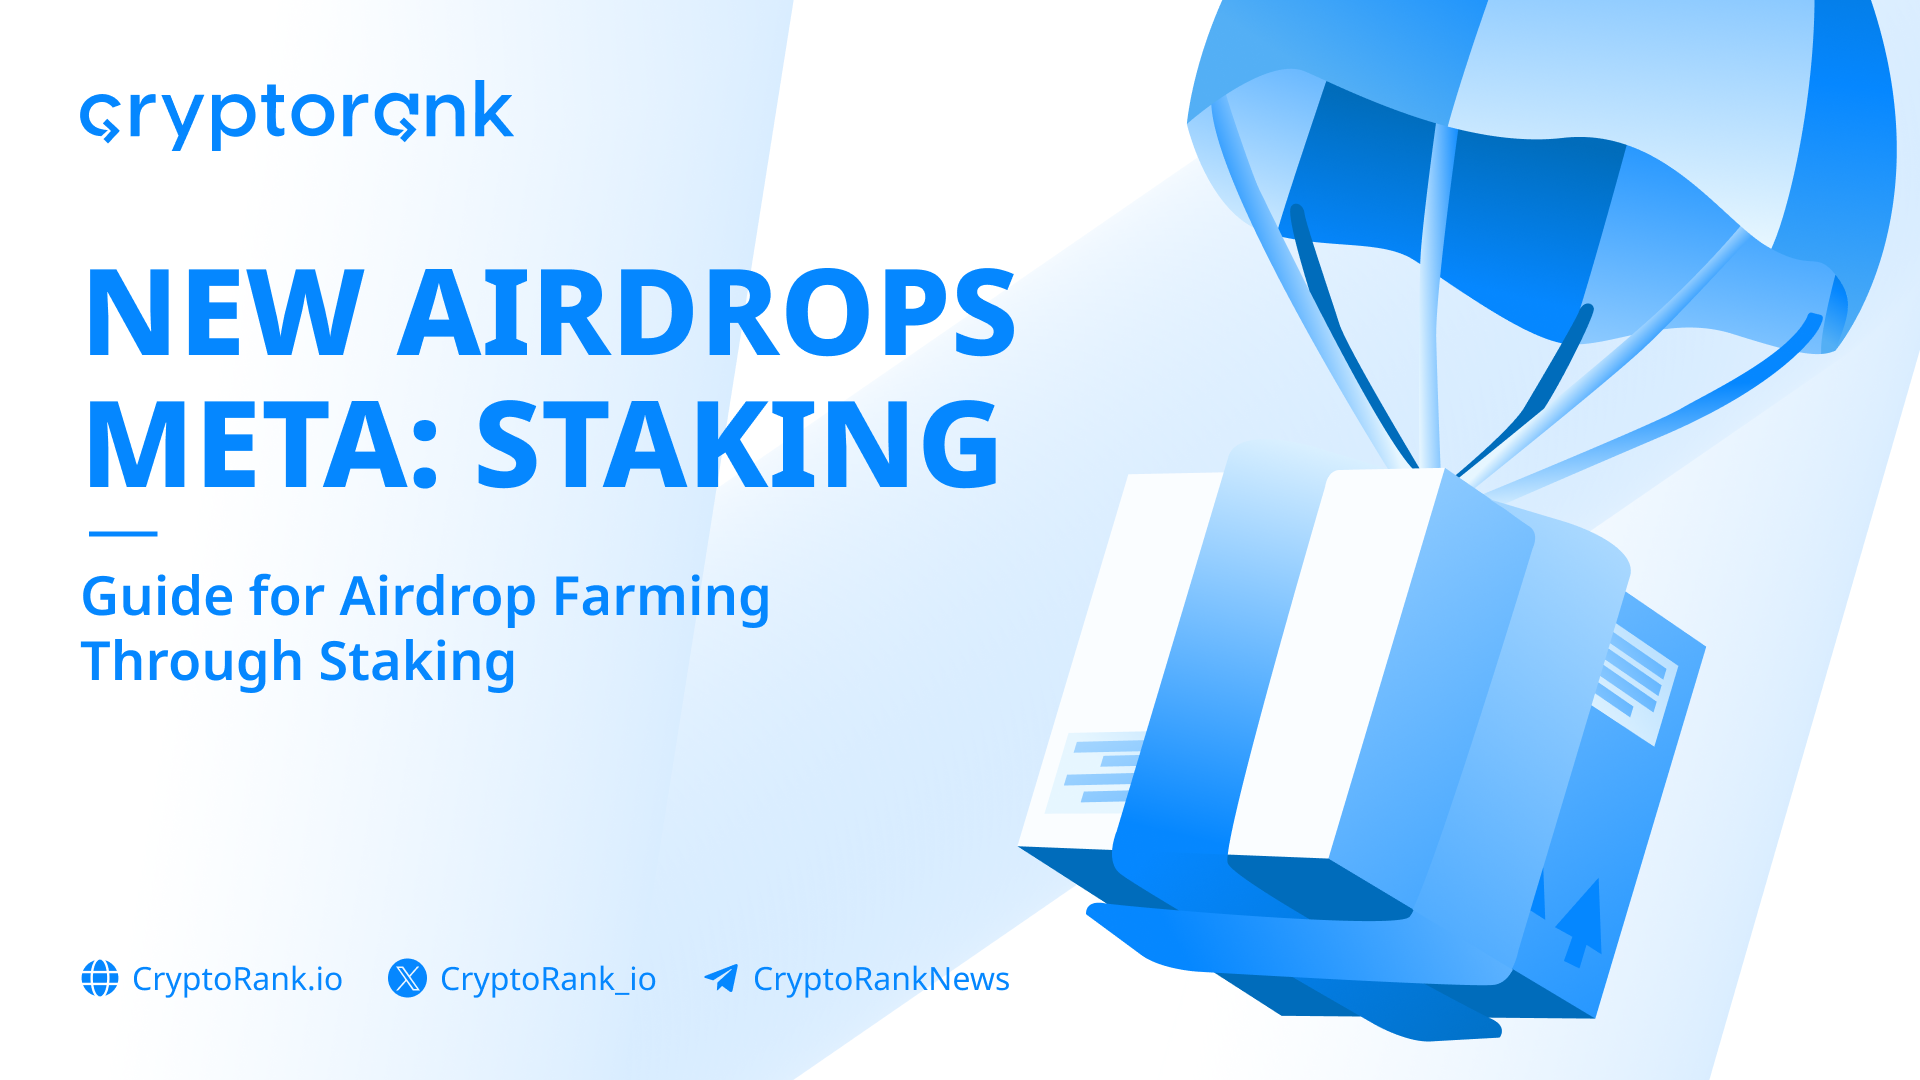 New Airdrops Meta: Staking